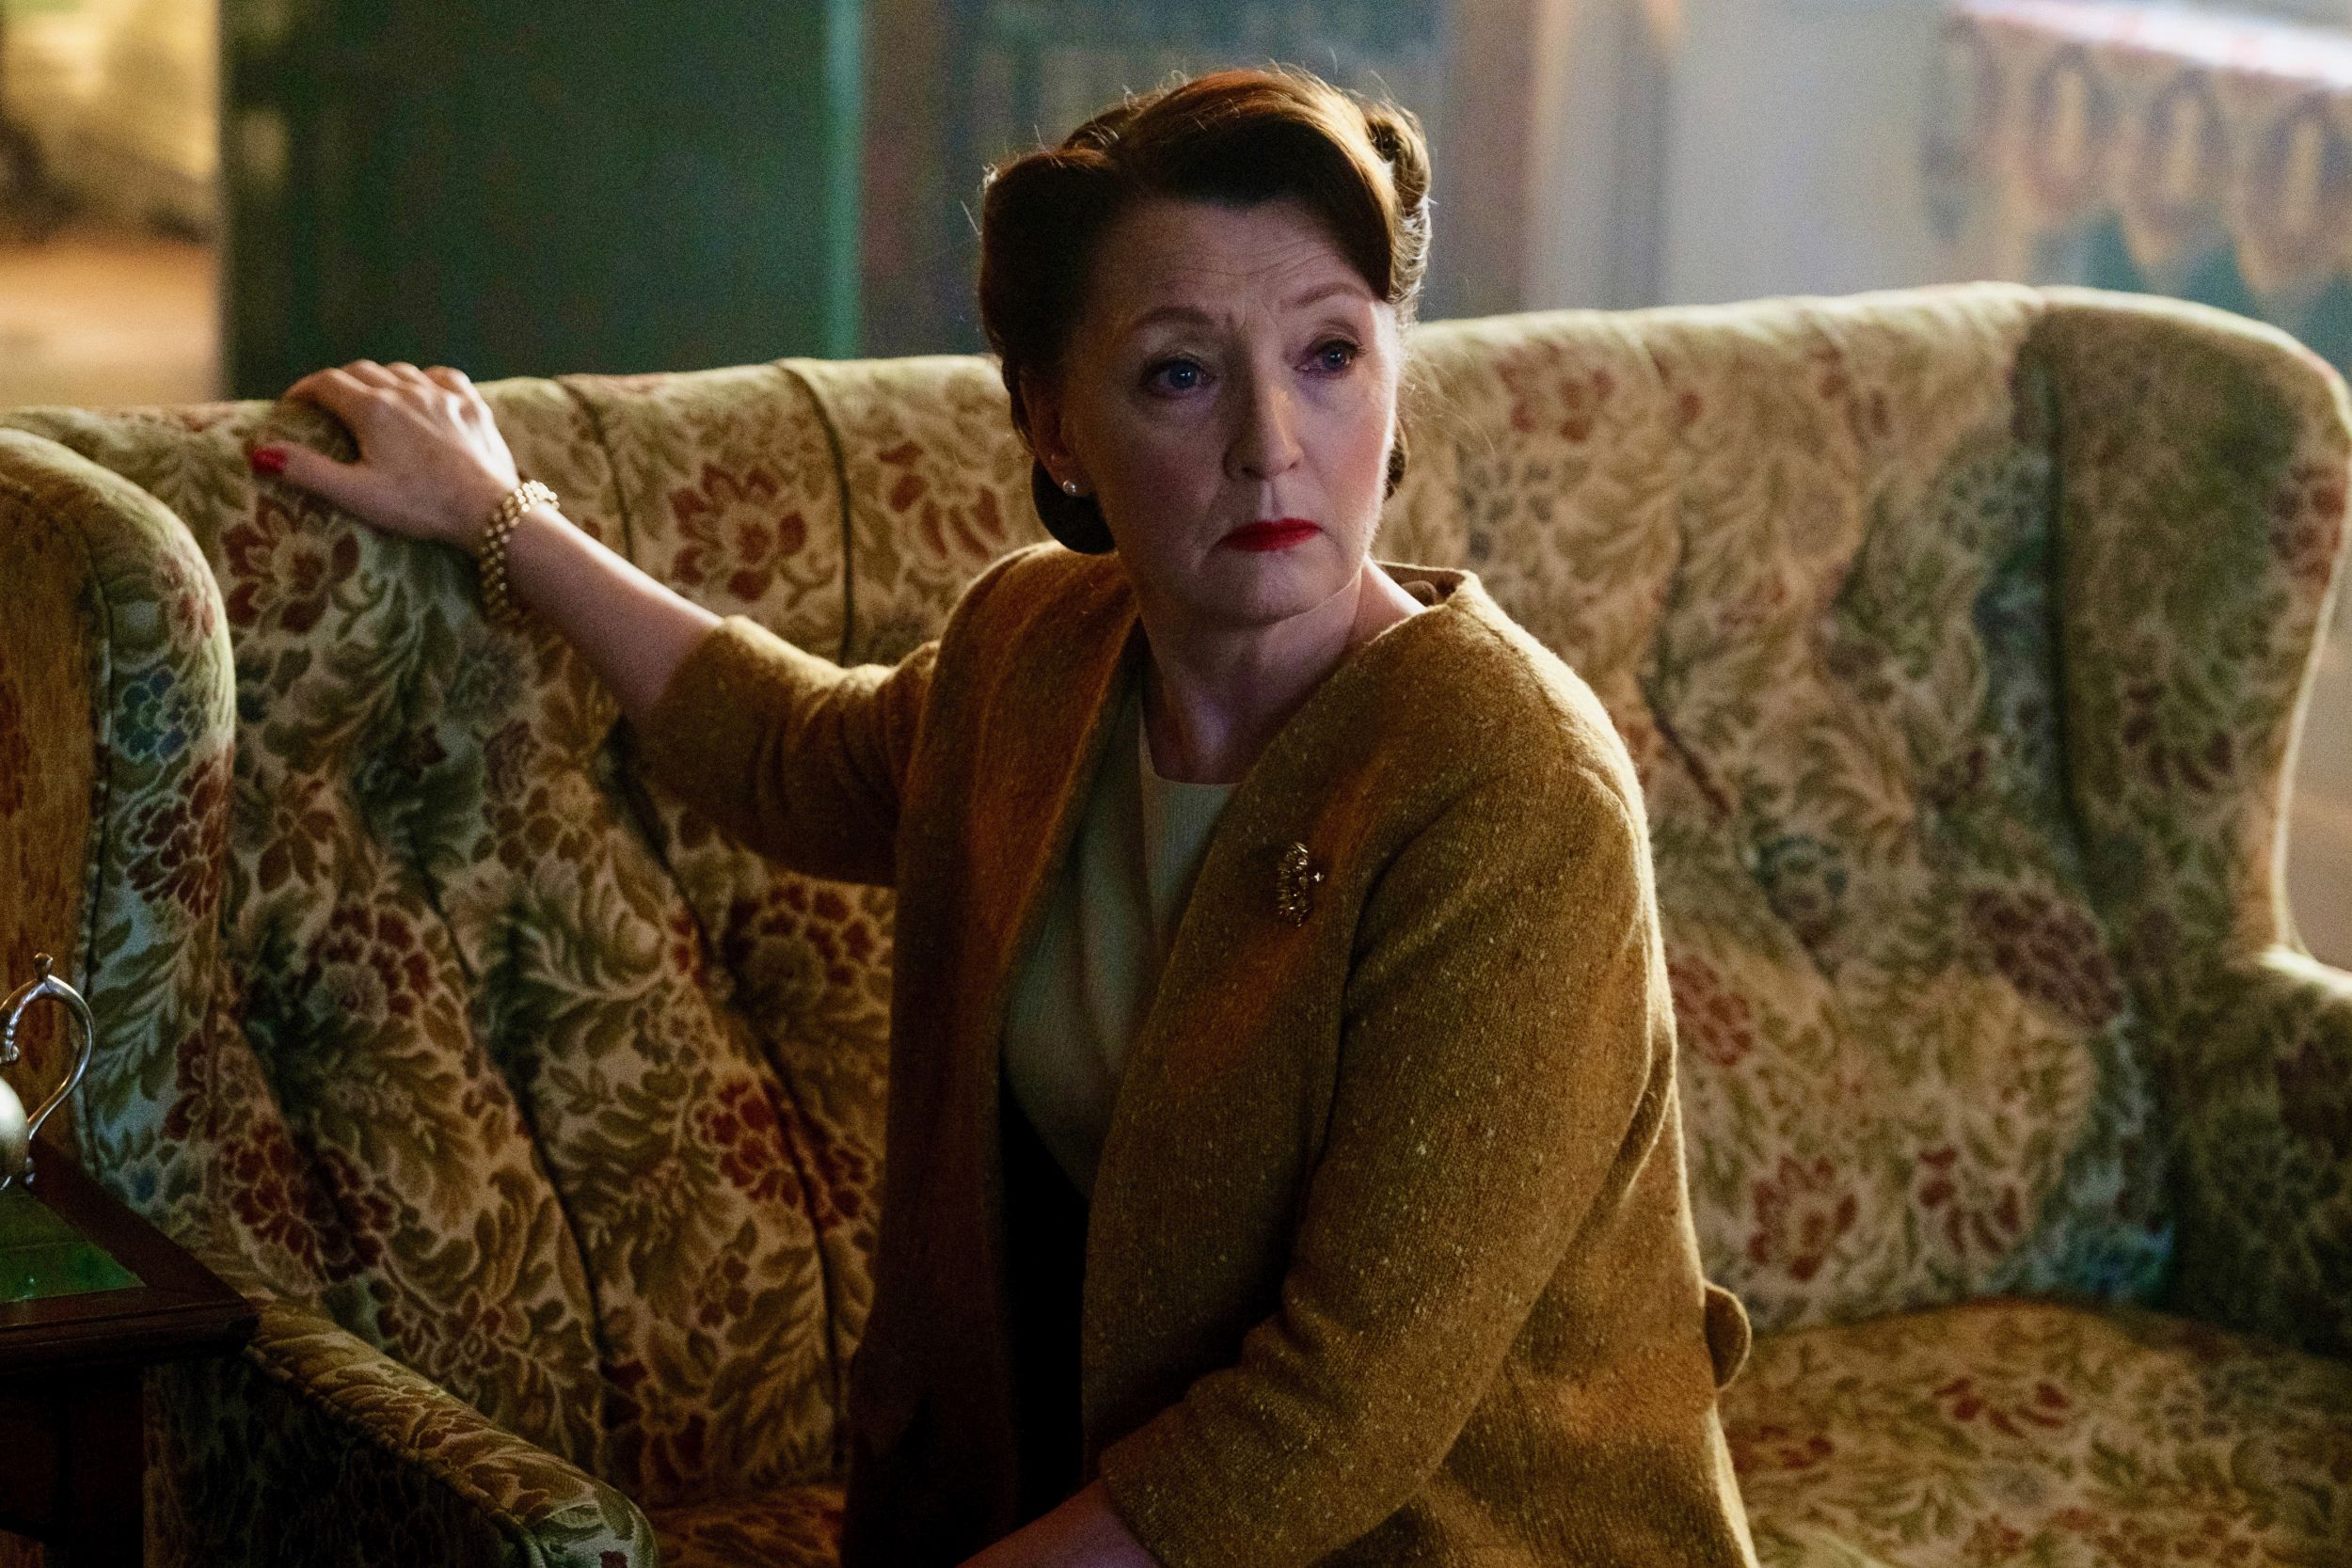 Lesley Manville as Roberta Chase sitting on the couch in 'World on Fire'